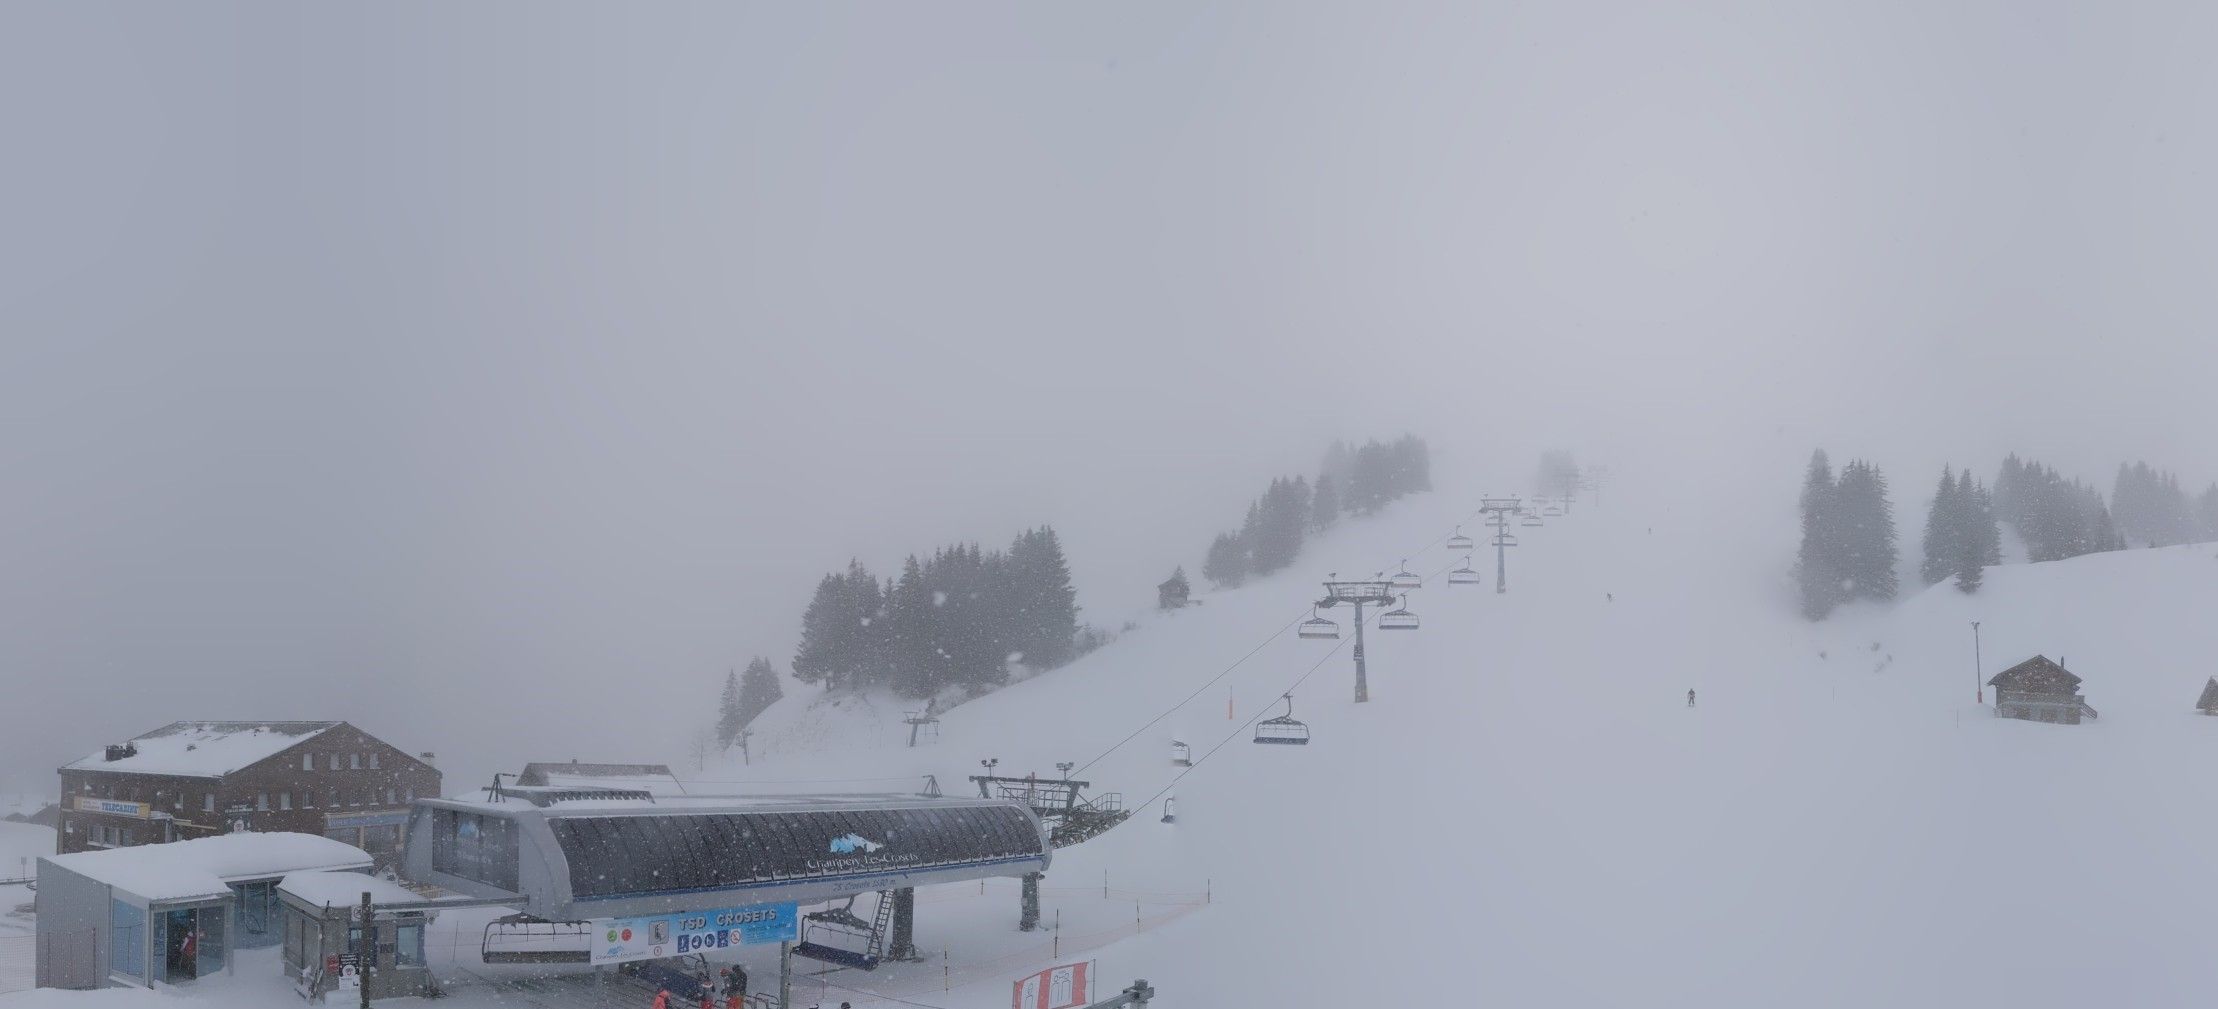 Up to 20 cm of snow possible for areas such as Les Portes du Soleil (roundshot.com)